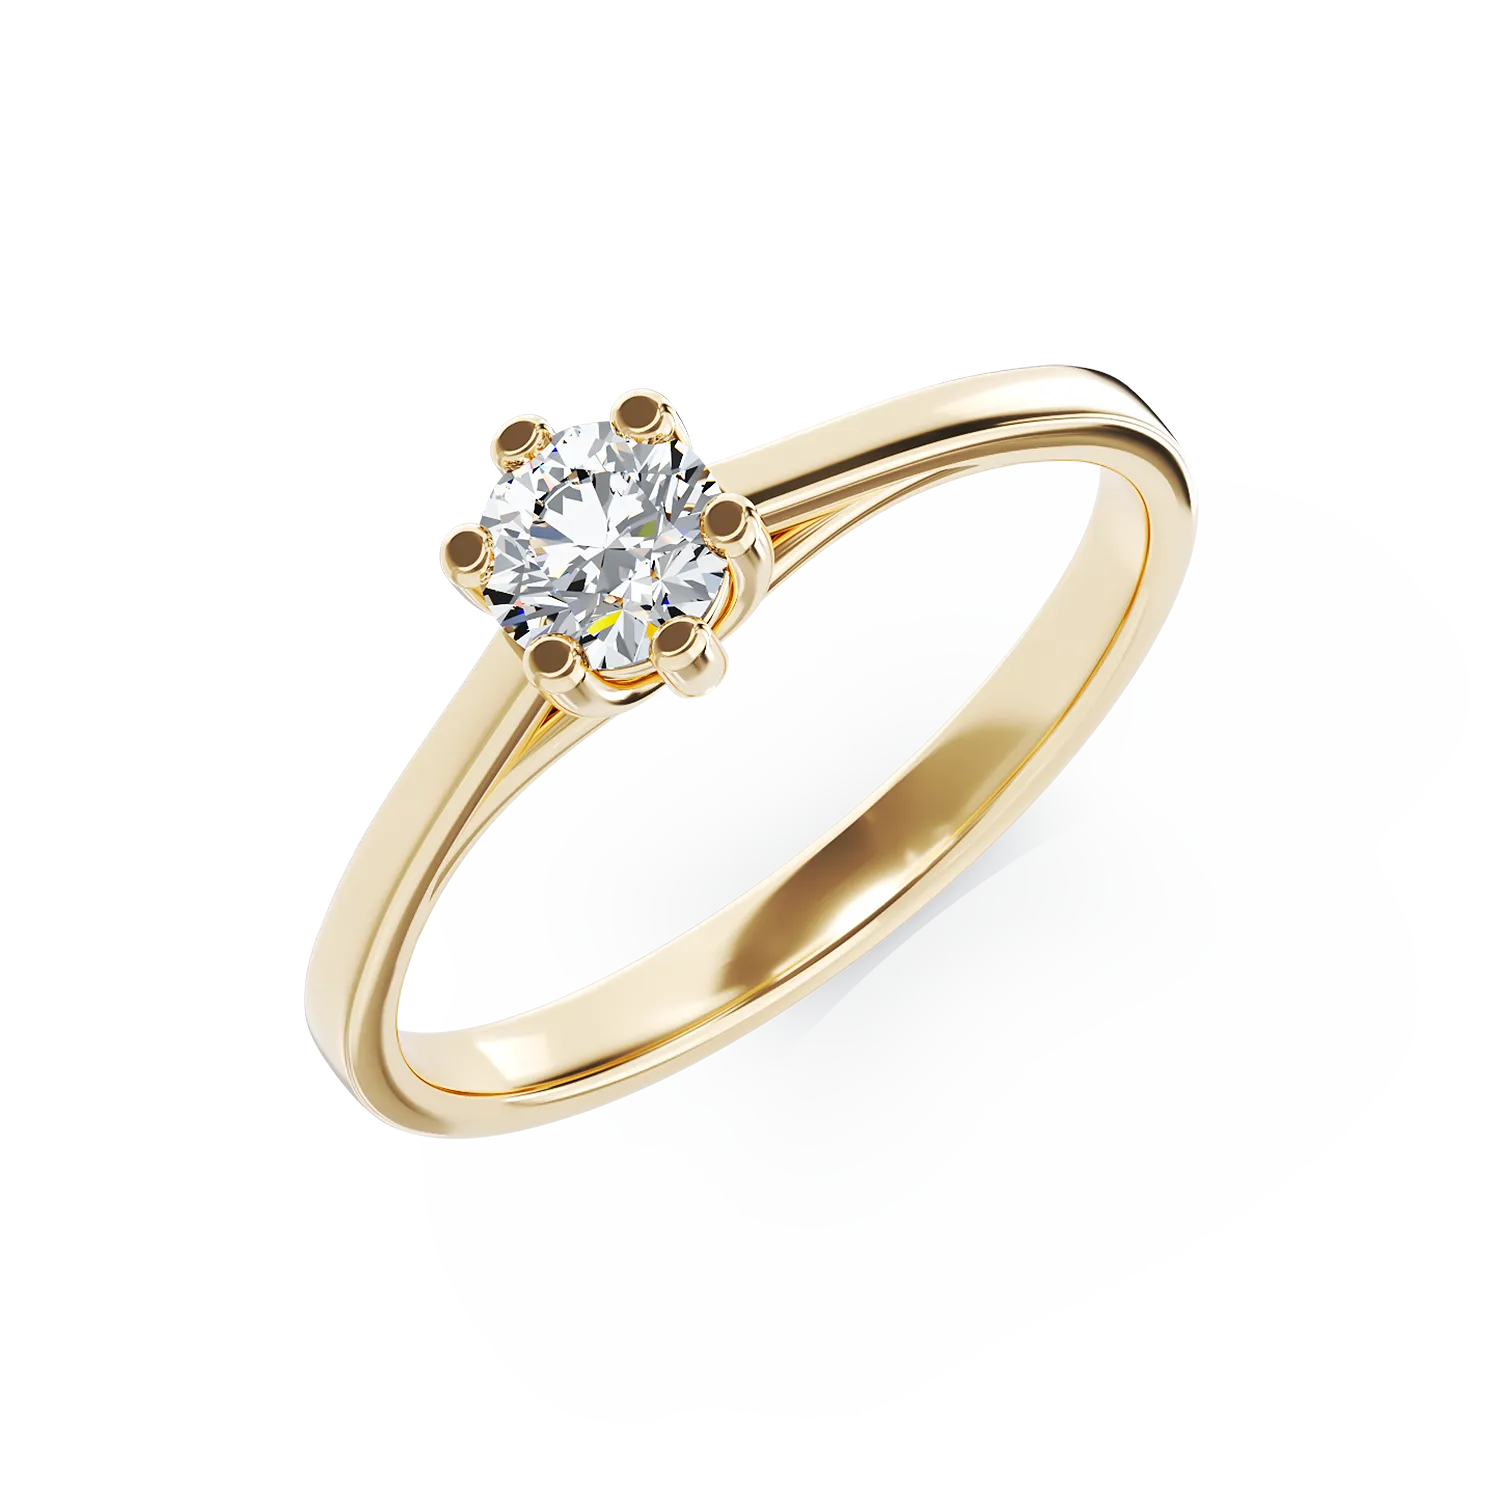 18k yellow gold engagement ring with 0.35ct diamond